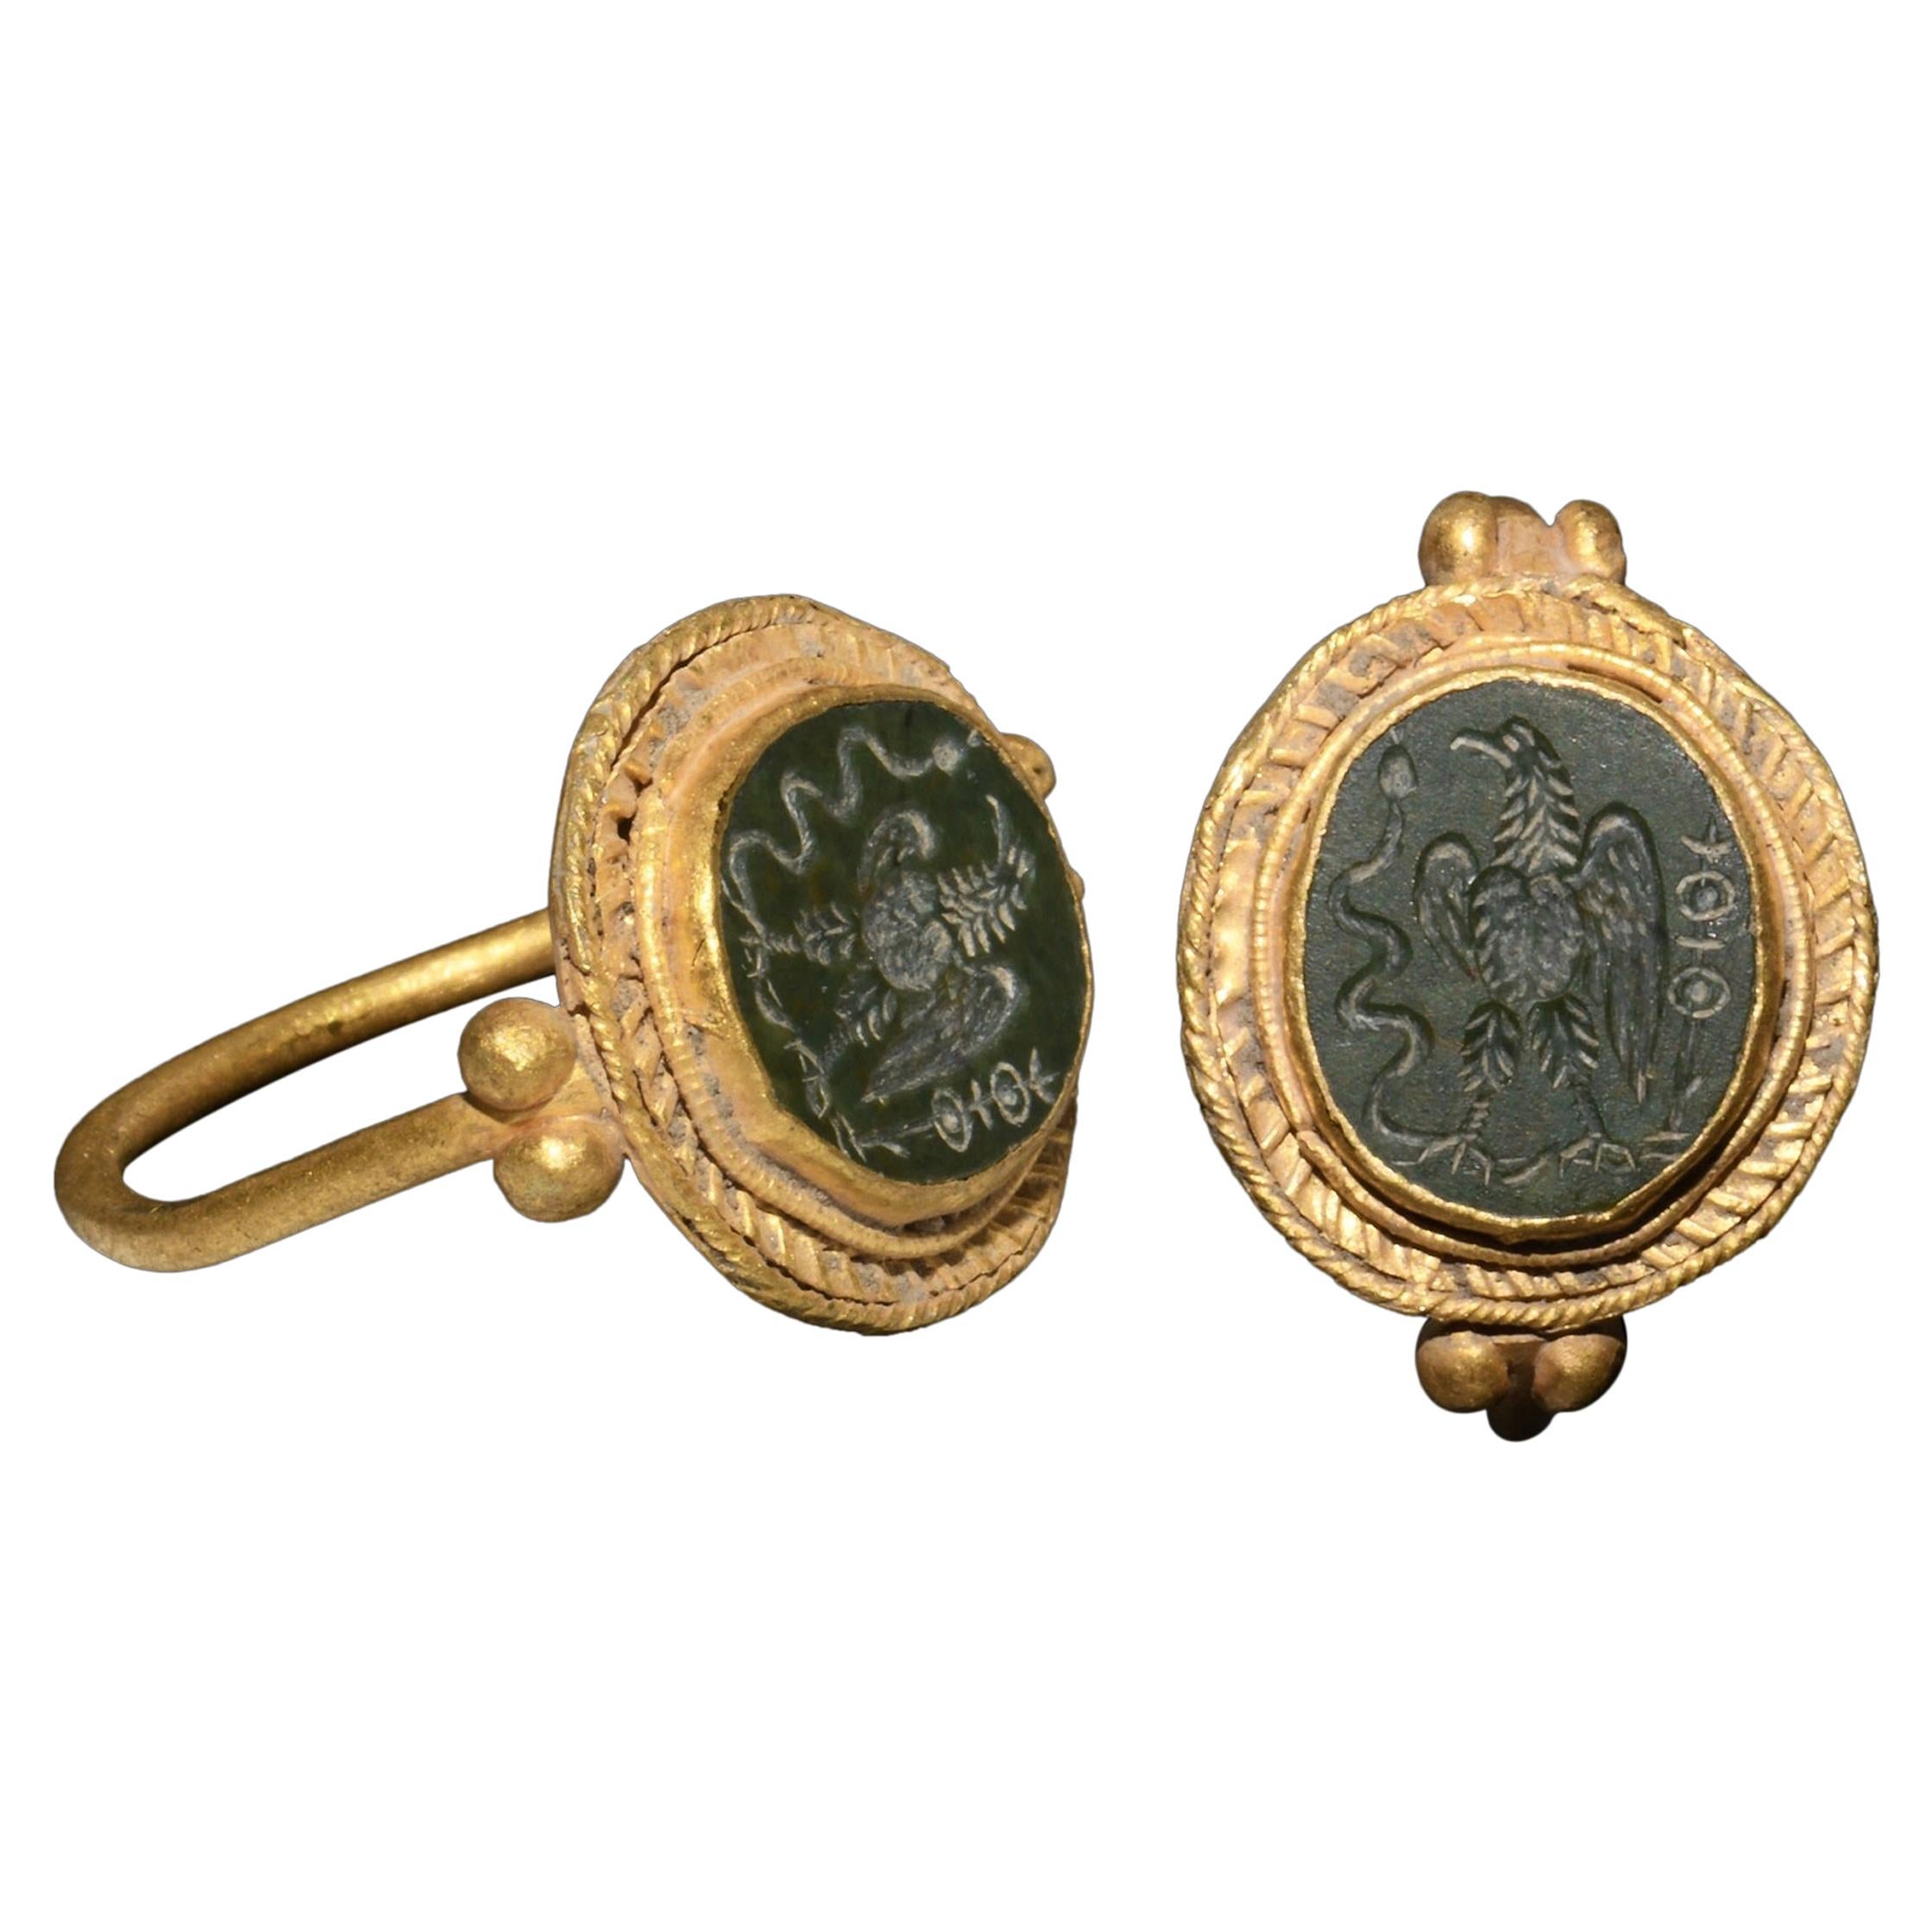 Roman Gold Ring with Eagle Gemstone, 4th Century AD